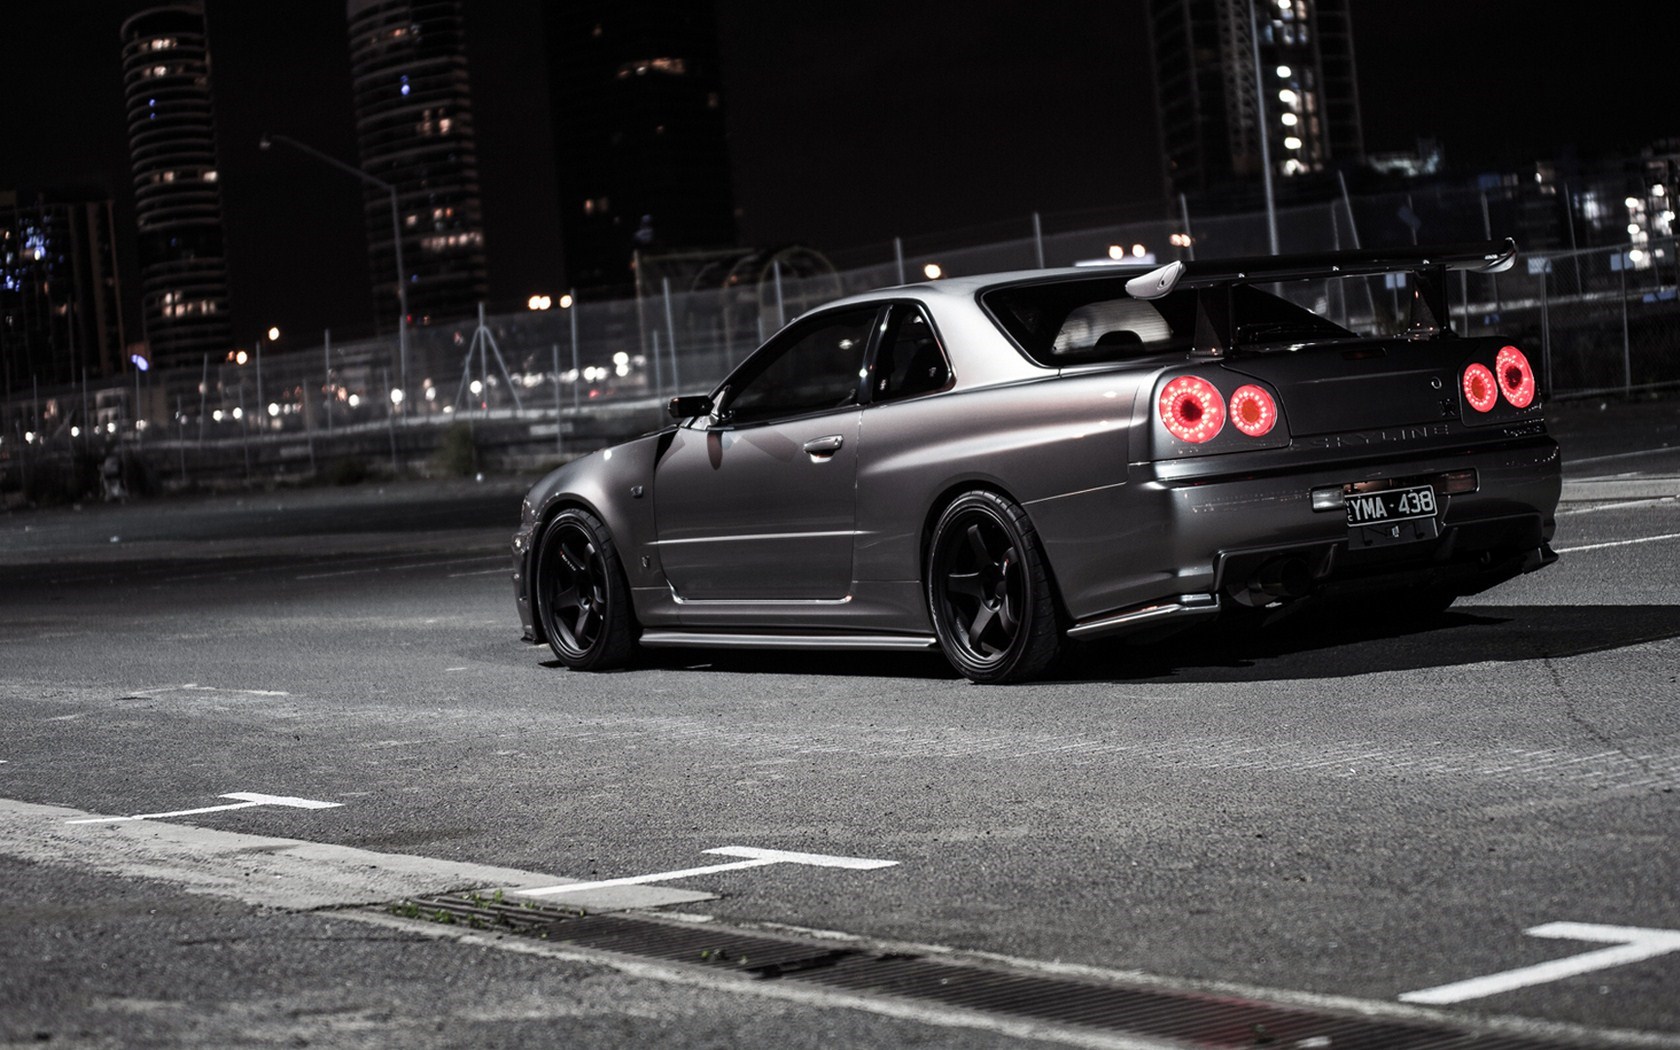 Picture 2016, Nissan Slyline R34 Street Racing Car Wallpaper ...